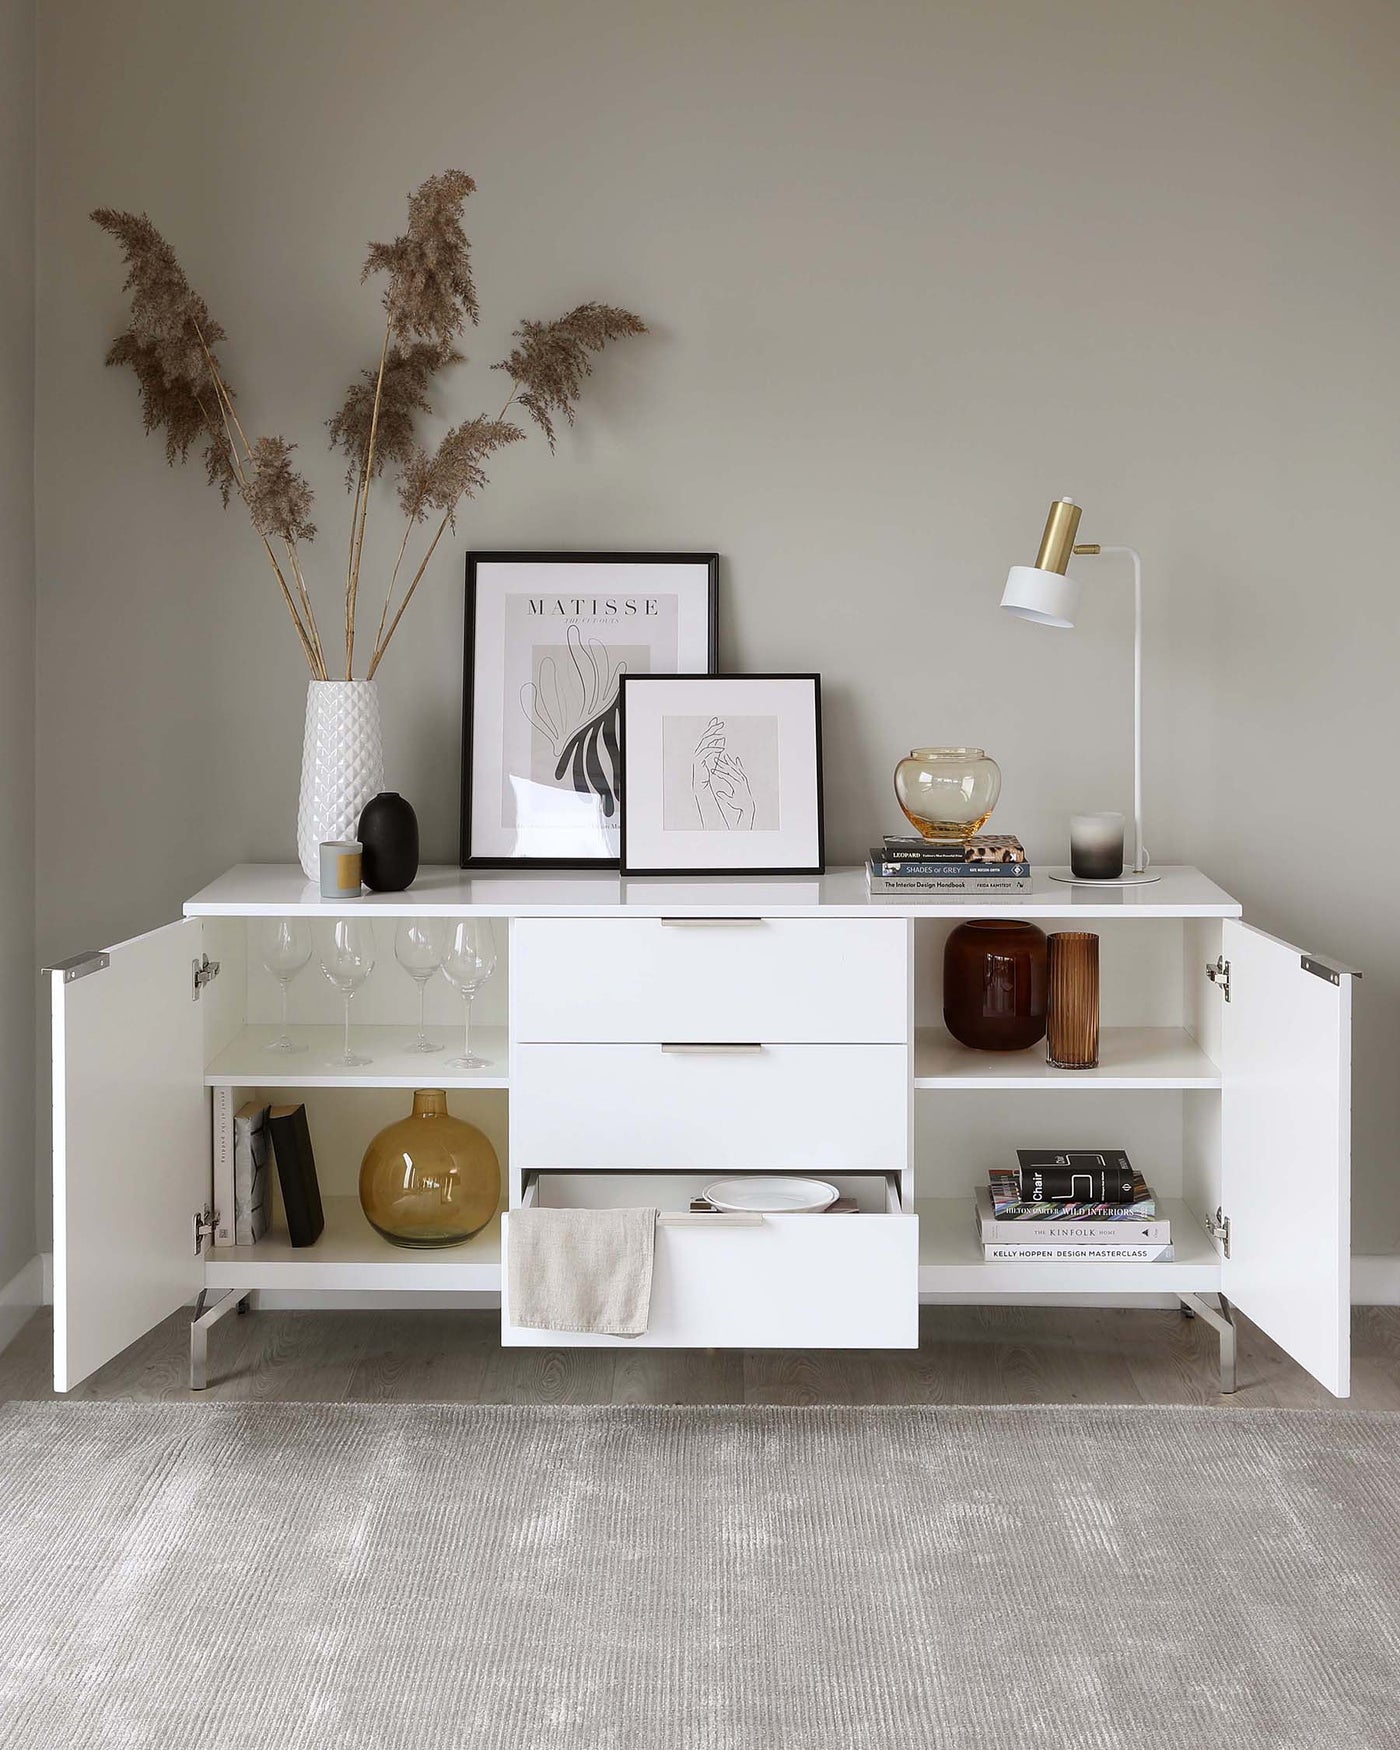 Modern white sideboard with multiple storage compartments, including shelves, drawers, and hinged cabinets, accentuated with minimalist metallic handles, on a light grey textured flooring.